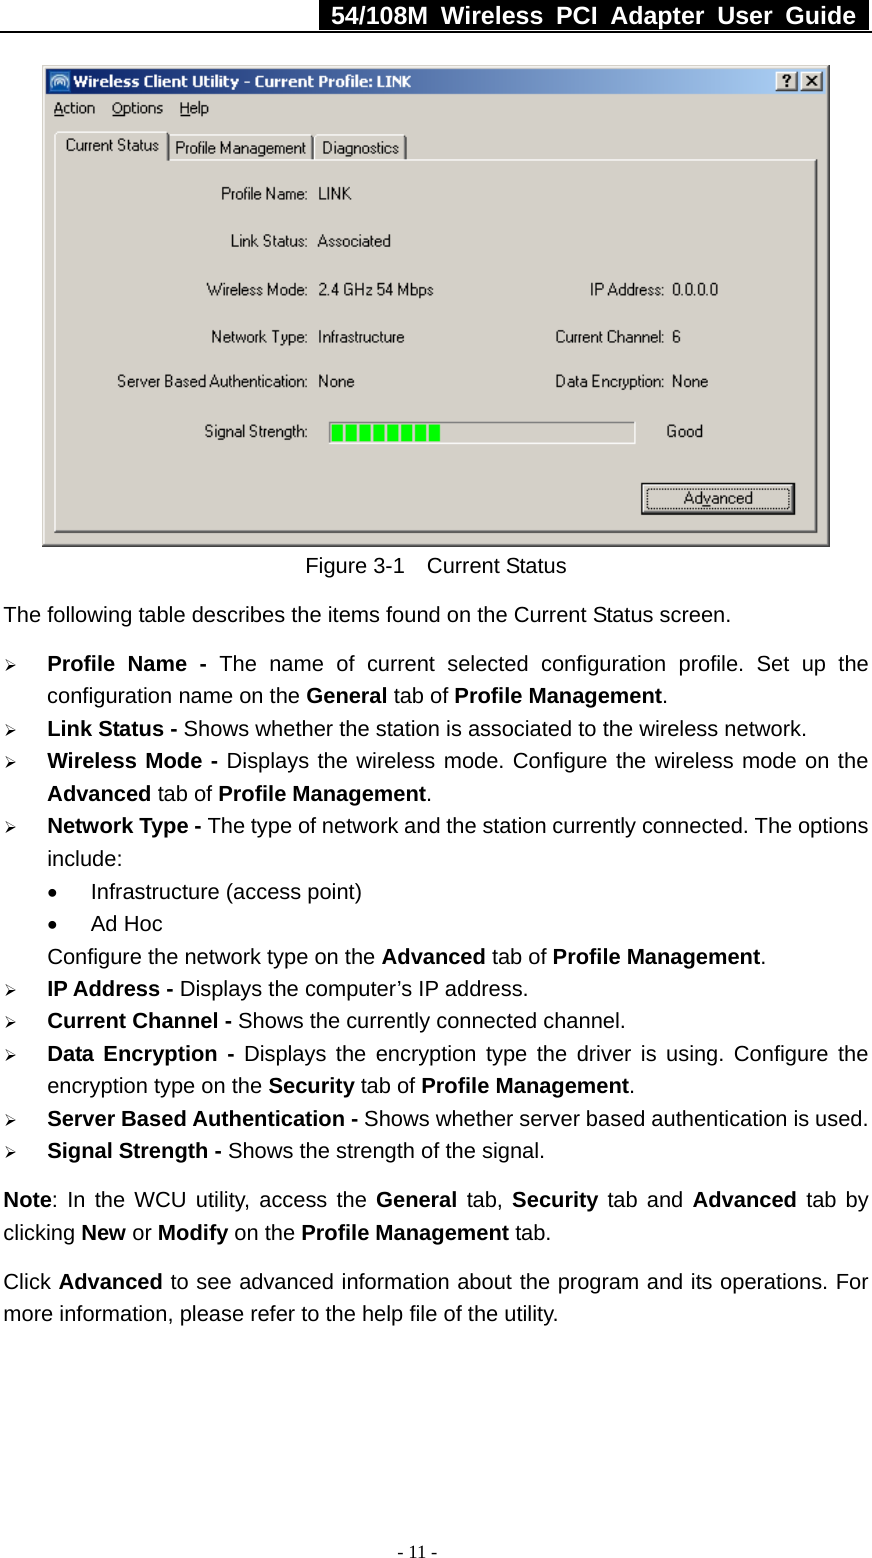   54/108M Wireless PCI Adapter User Guide  - 11 -  Figure 3-1  Current Status The following table describes the items found on the Current Status screen. ¾ Profile Name - The name of current selected configuration profile. Set up the configuration name on the General tab of Profile Management.  ¾ Link Status - Shows whether the station is associated to the wireless network. ¾ Wireless Mode - Displays the wireless mode. Configure the wireless mode on the Advanced tab of Profile Management. ¾ Network Type - The type of network and the station currently connected. The options include: •  Infrastructure (access point) • Ad Hoc Configure the network type on the Advanced tab of Profile Management. ¾ IP Address - Displays the computer’s IP address. ¾ Current Channel - Shows the currently connected channel. ¾ Data Encryption - Displays the encryption type the driver is using. Configure the encryption type on the Security tab of Profile Management. ¾ Server Based Authentication - Shows whether server based authentication is used. ¾ Signal Strength - Shows the strength of the signal. Note: In the WCU utility, access the General tab, Security tab and Advanced tab by clicking New or Modify on the Profile Management tab. Click Advanced to see advanced information about the program and its operations. For more information, please refer to the help file of the utility. 